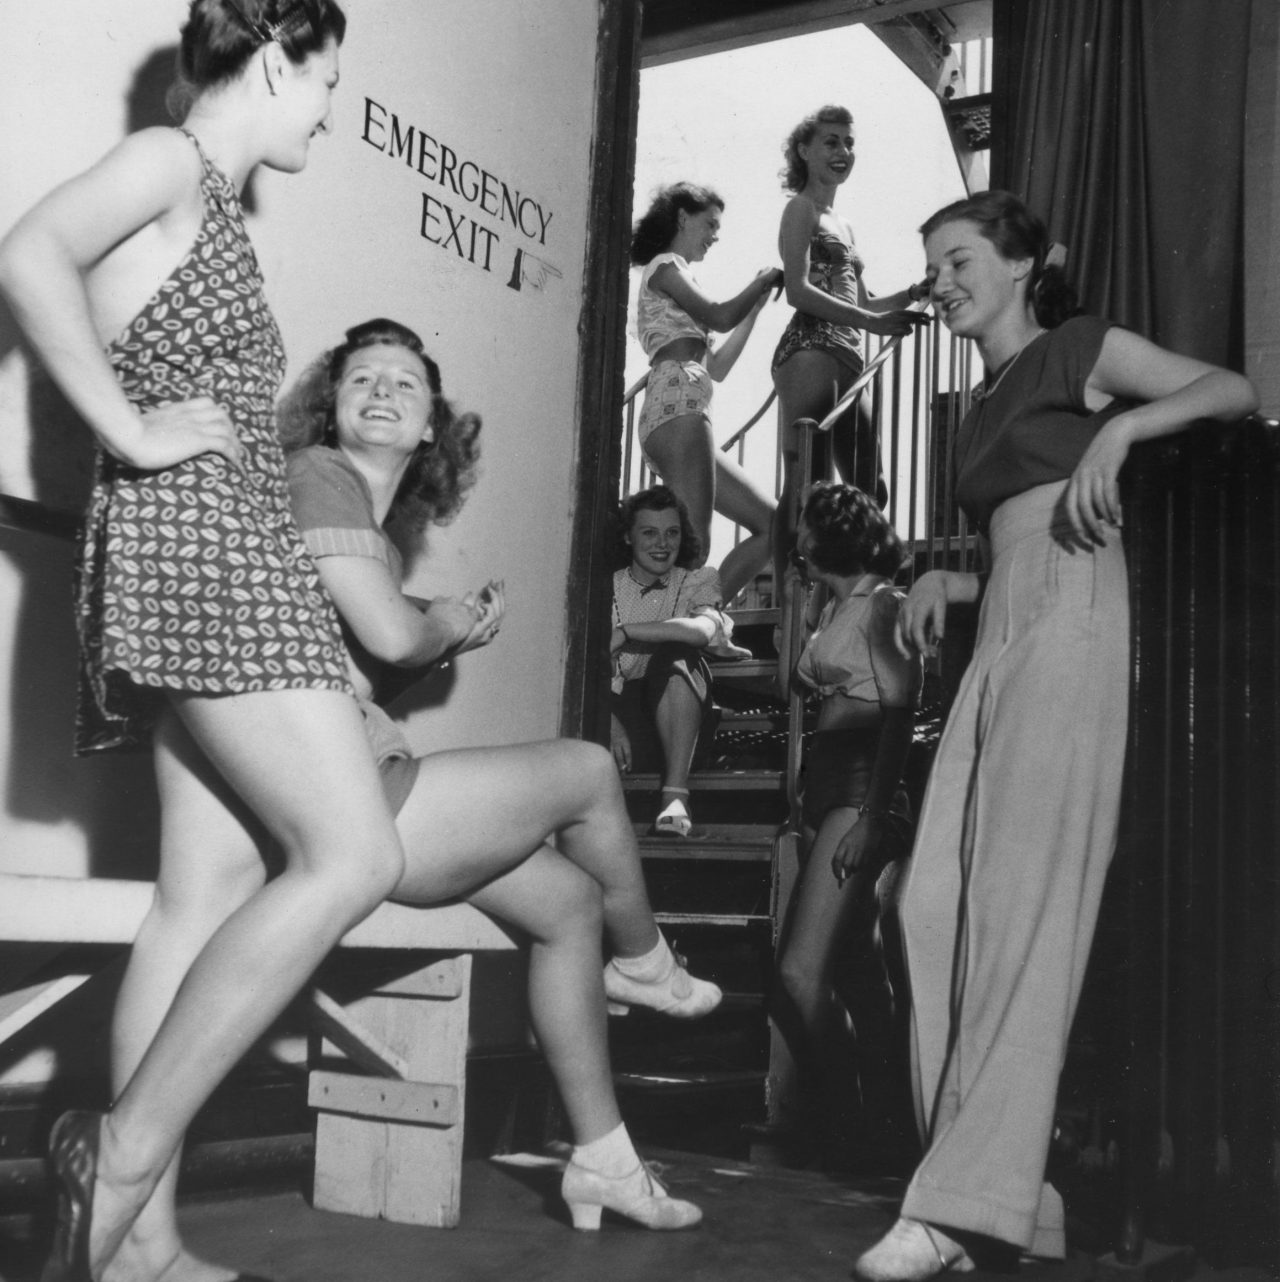 Its alright to be nude, but if it moves, its rude.” - The Extraordinary History of the Windmill Theatre picture picture